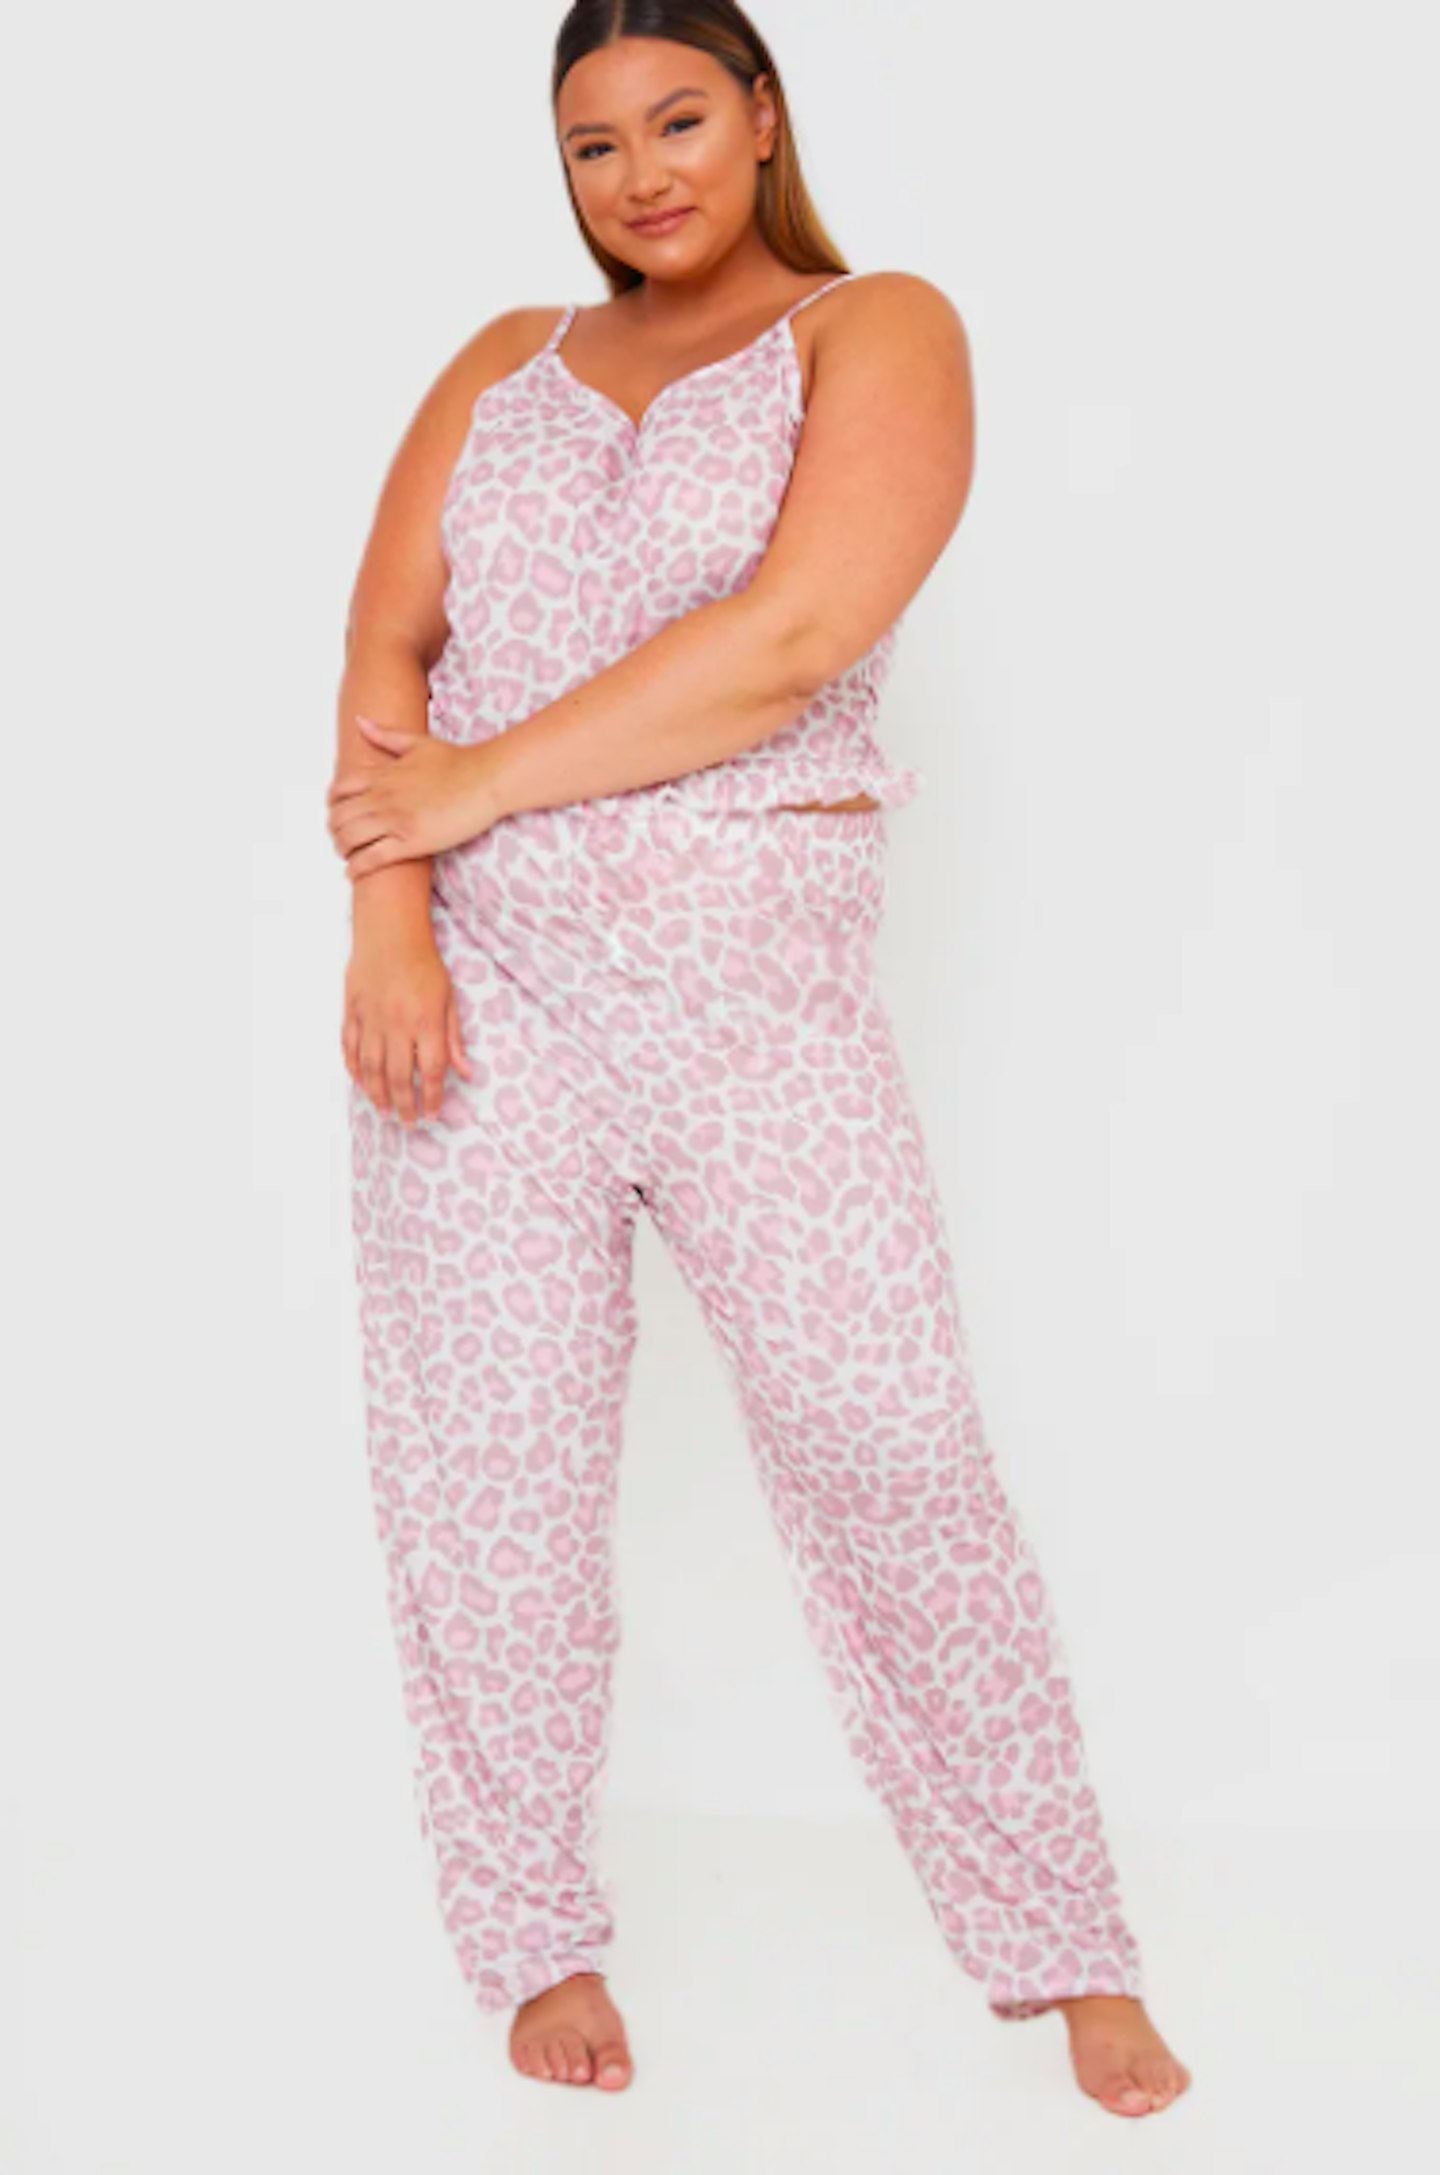 Gemma Collins x In The Style plus size collection